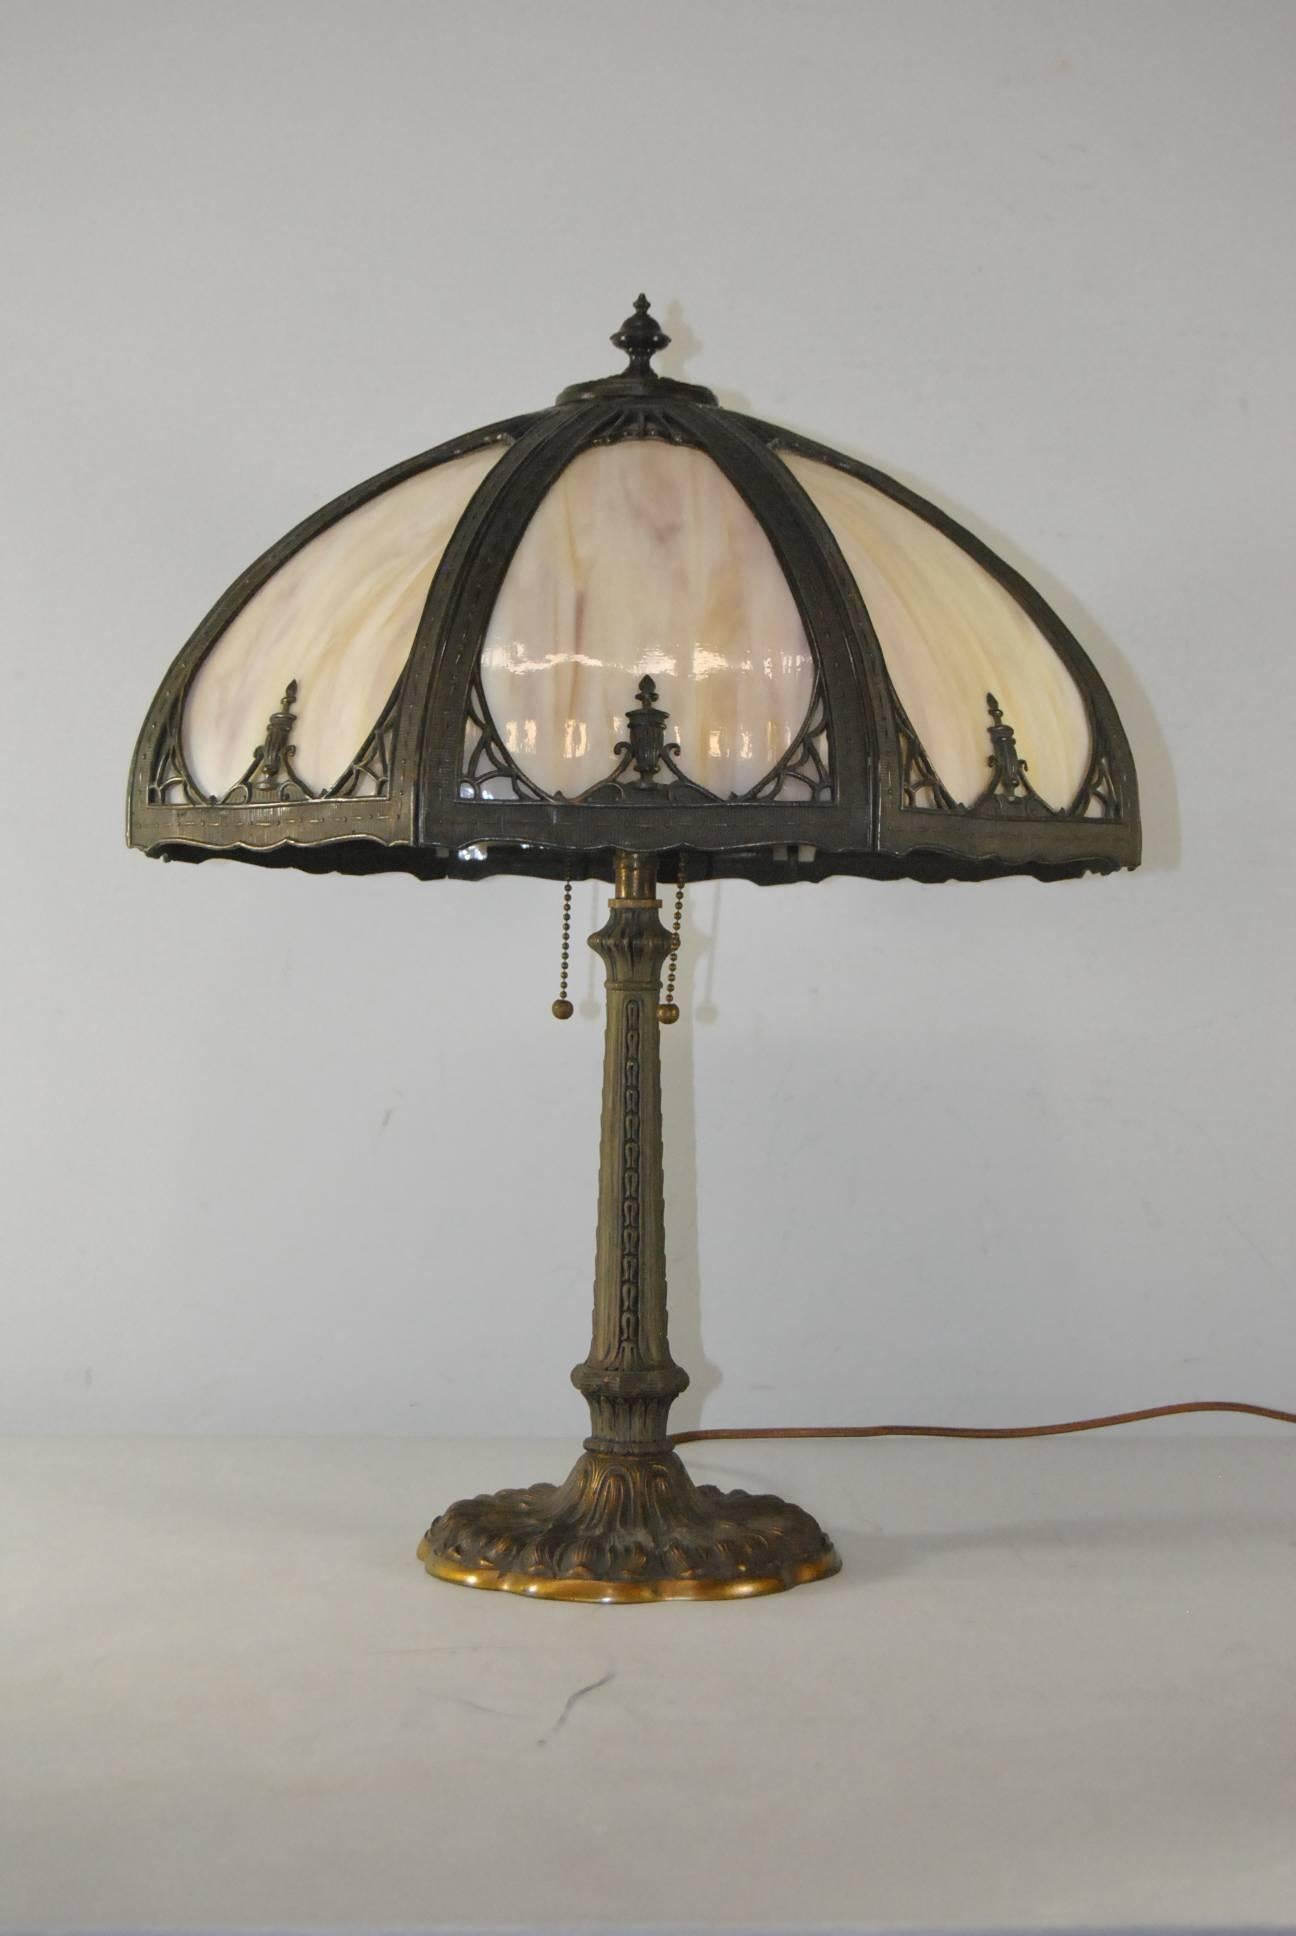 A nice eight-panel lamp with light caramel with slight hints of puple slag glass. There are no cracks in the glass. Base and sockets are original with nice long chains and ball pulls. Good patina. Signed Miller and numbered 952 on the underside of